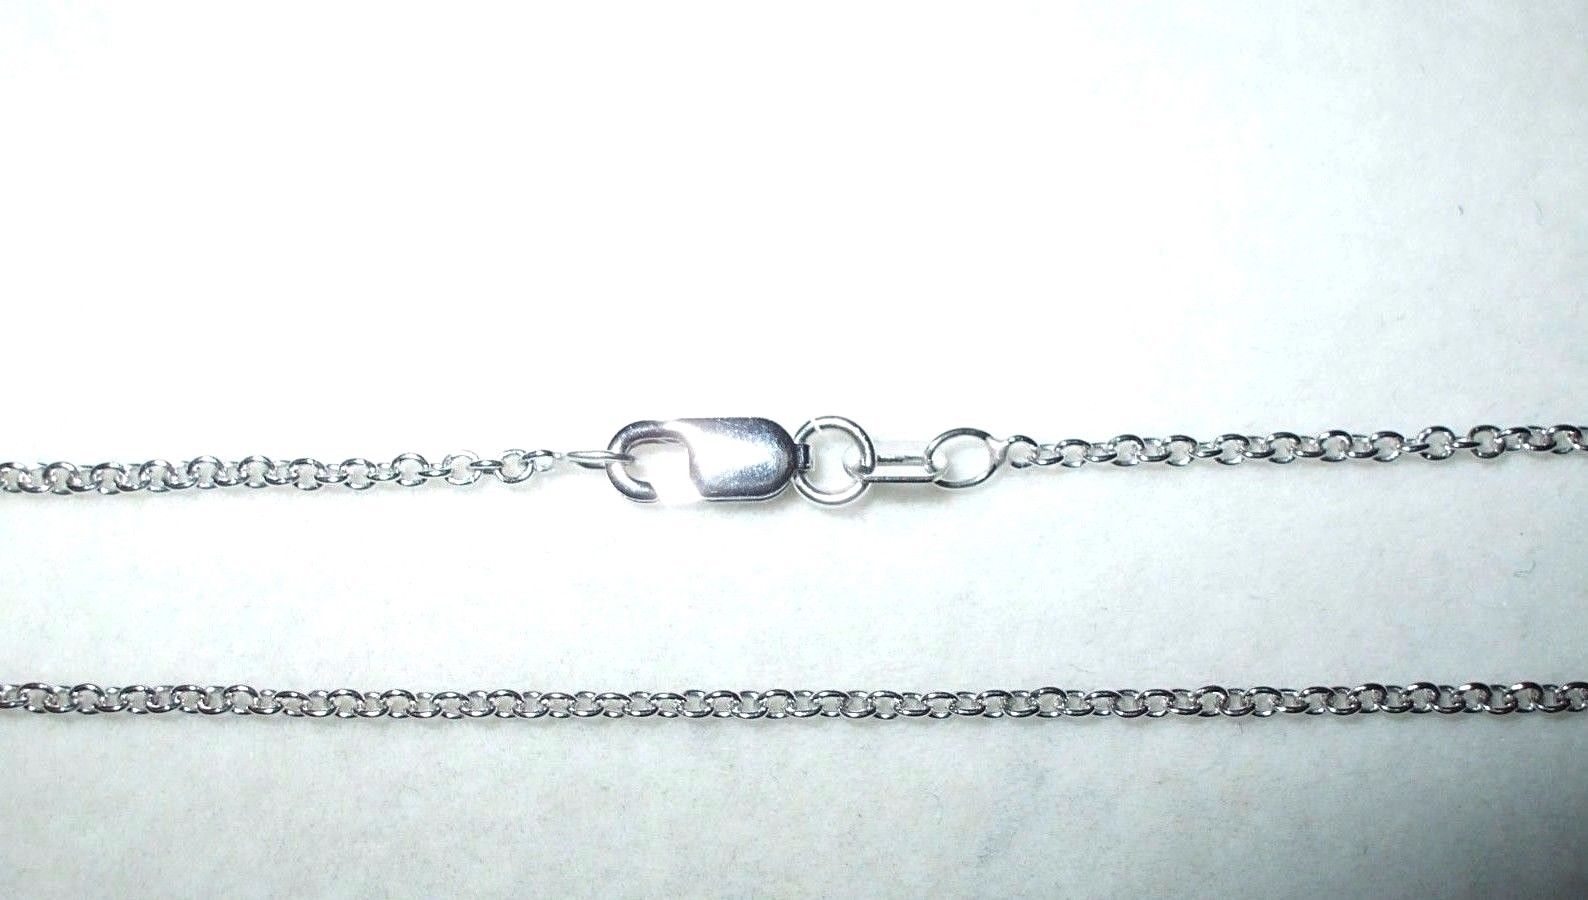 16 inch 14K white gold cable chain with lobster clasp 2.4 grams 0.9 mm $330